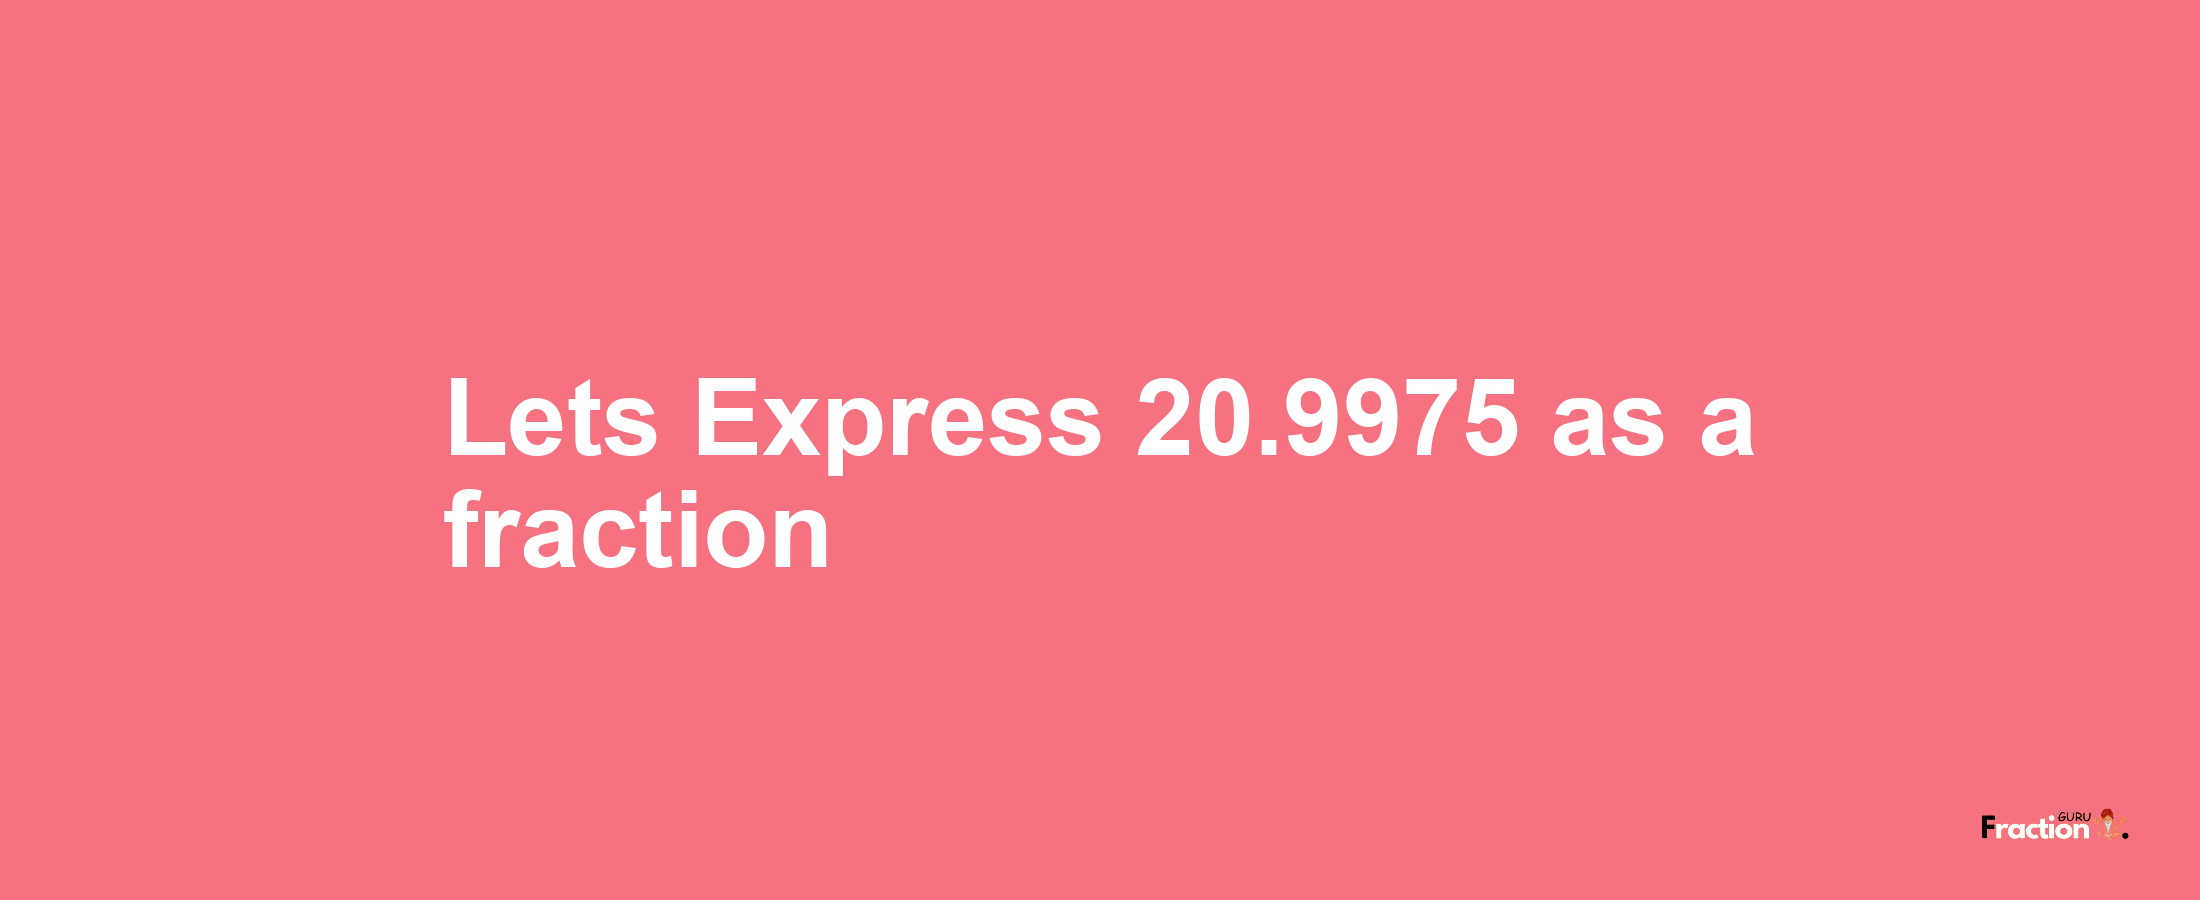 Lets Express 20.9975 as afraction